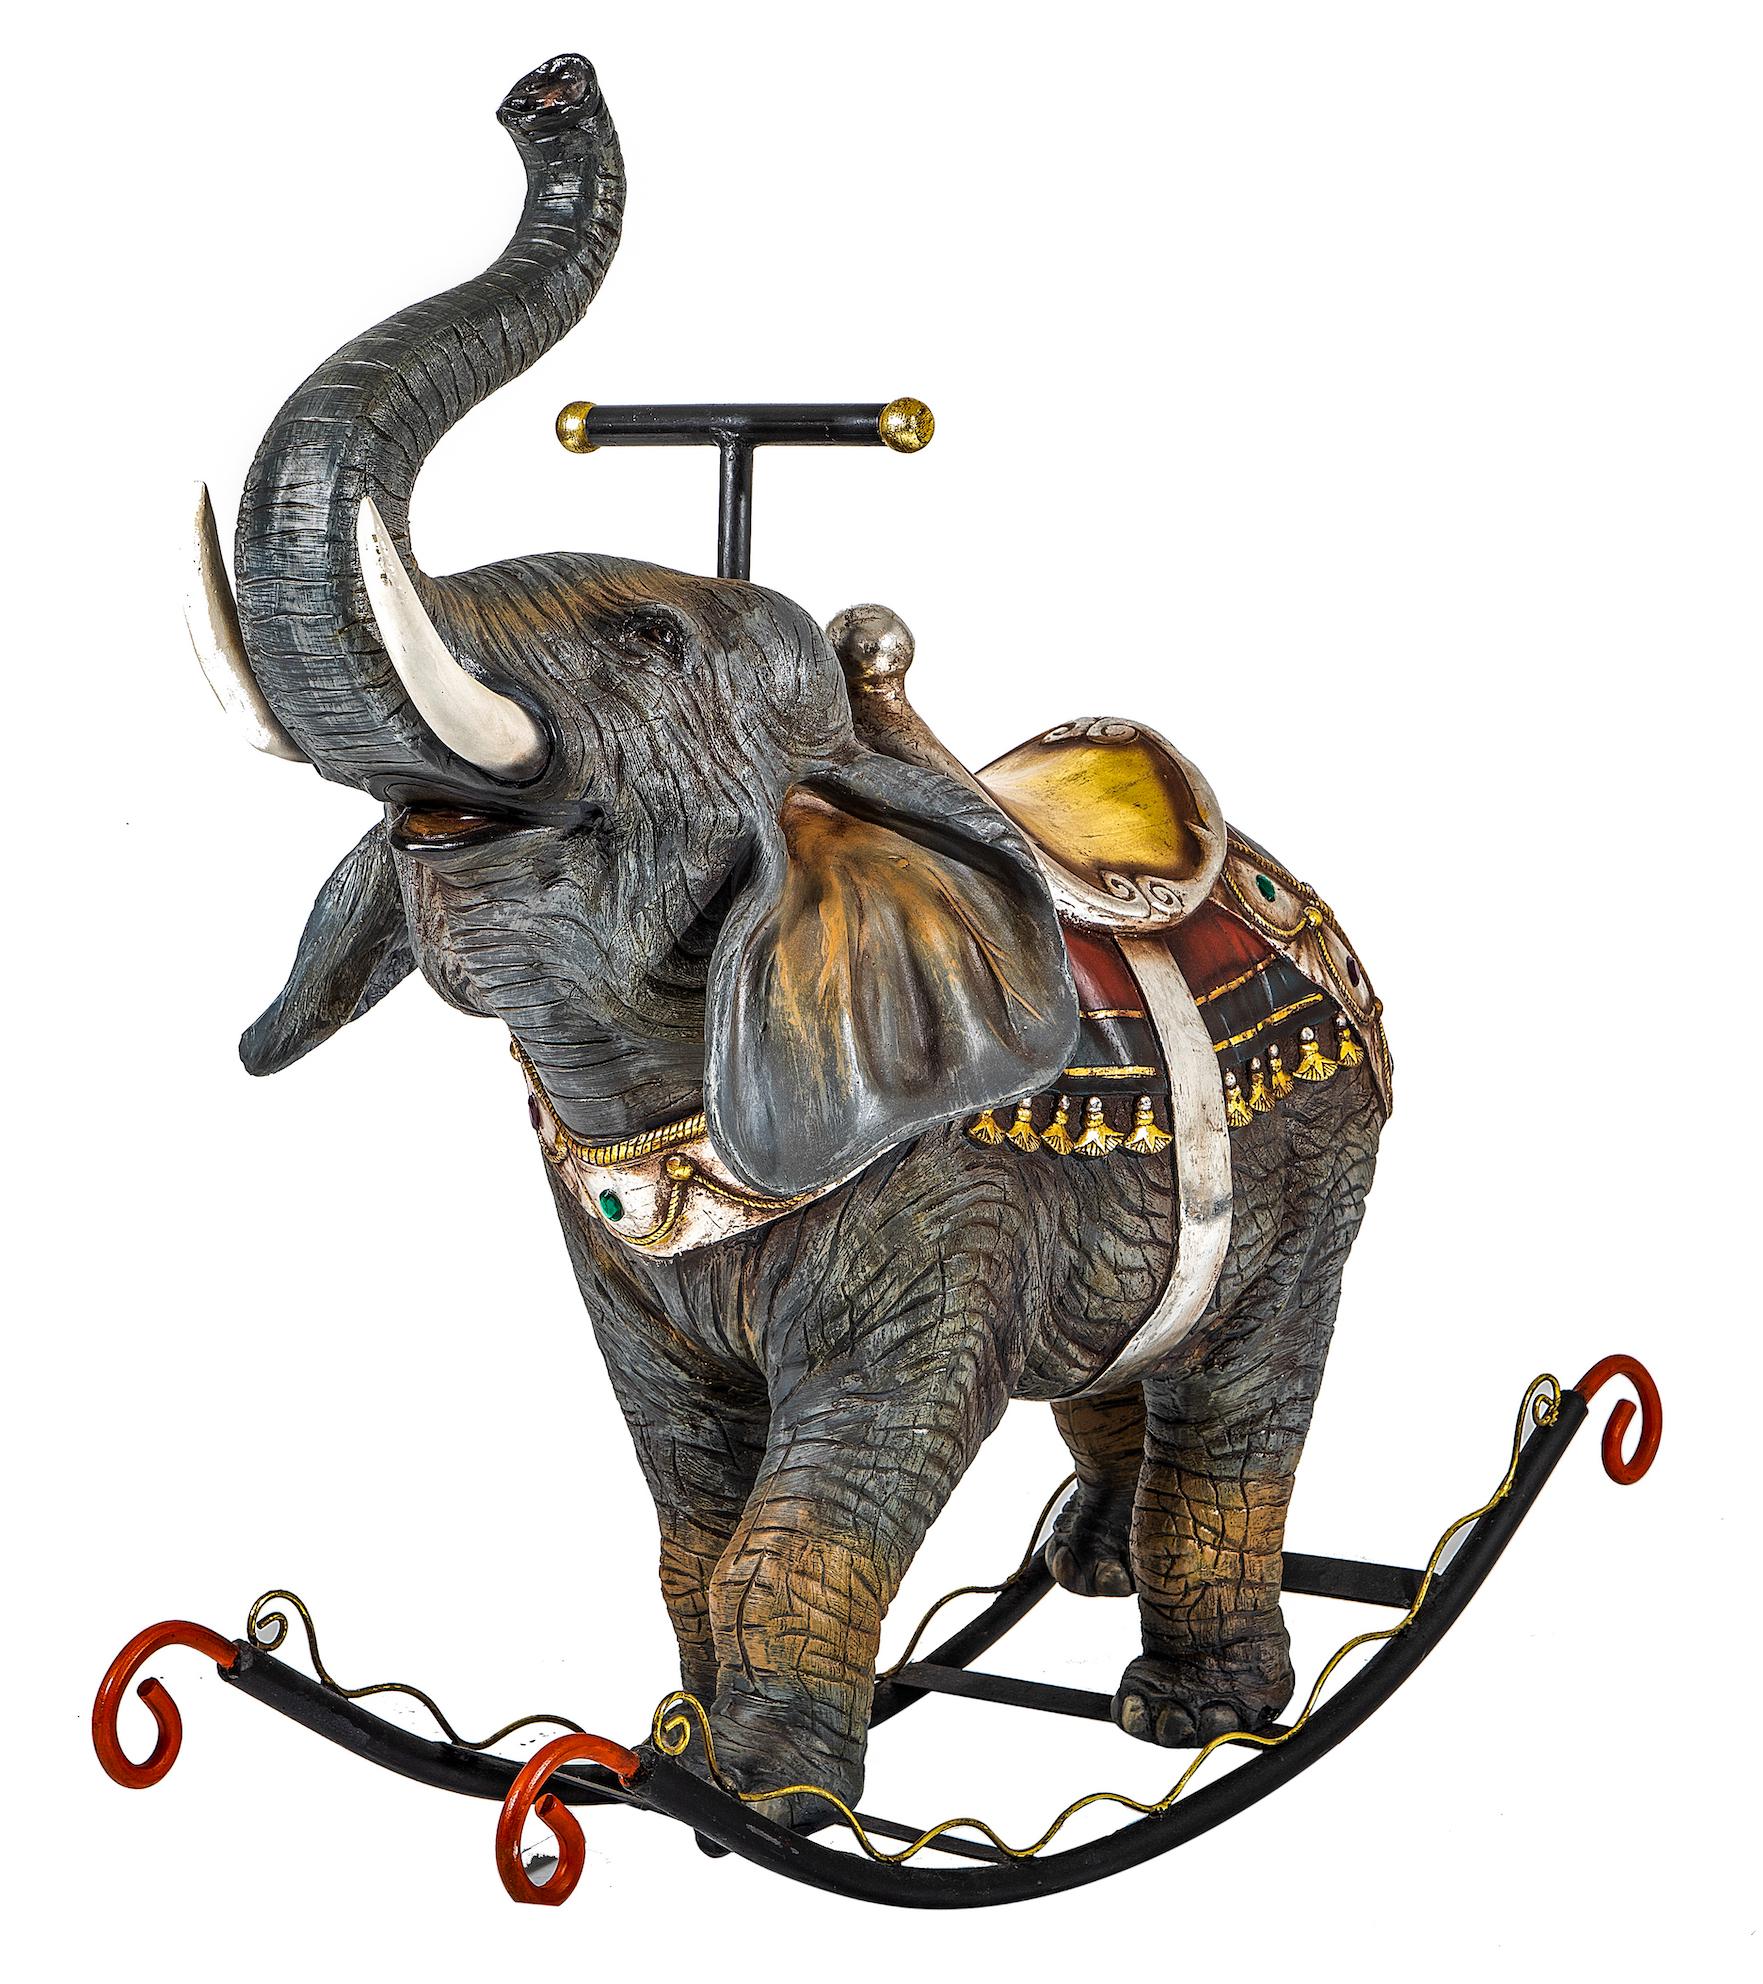 Eye catching and whimsical, this very limited edition elephant rocker is a spectacular showpiece. Lifelike down to its most minute details, this exquisite piece is equally at home in a child's room, living room or entryway. Made in Germany, between